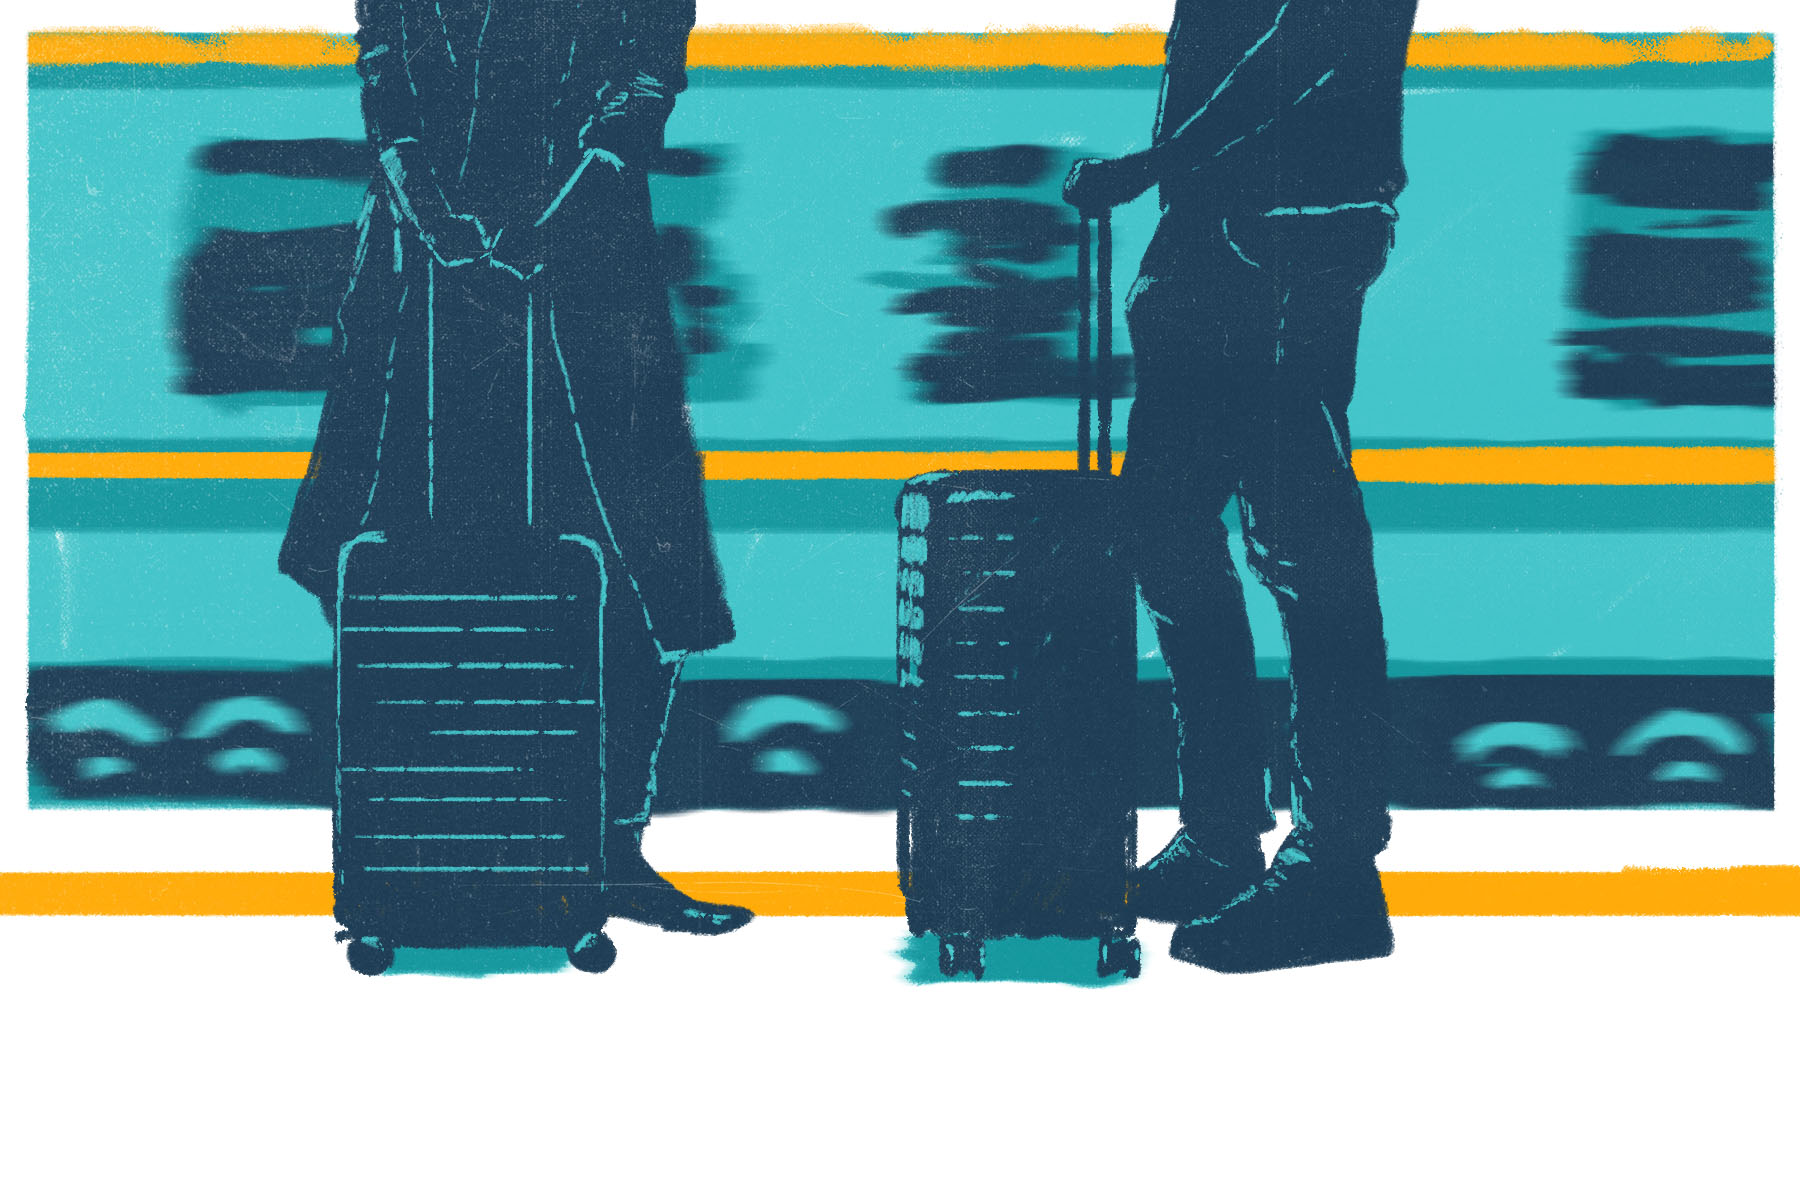 An illustration of the lower bodies of two people standing on a station platform with suitcases